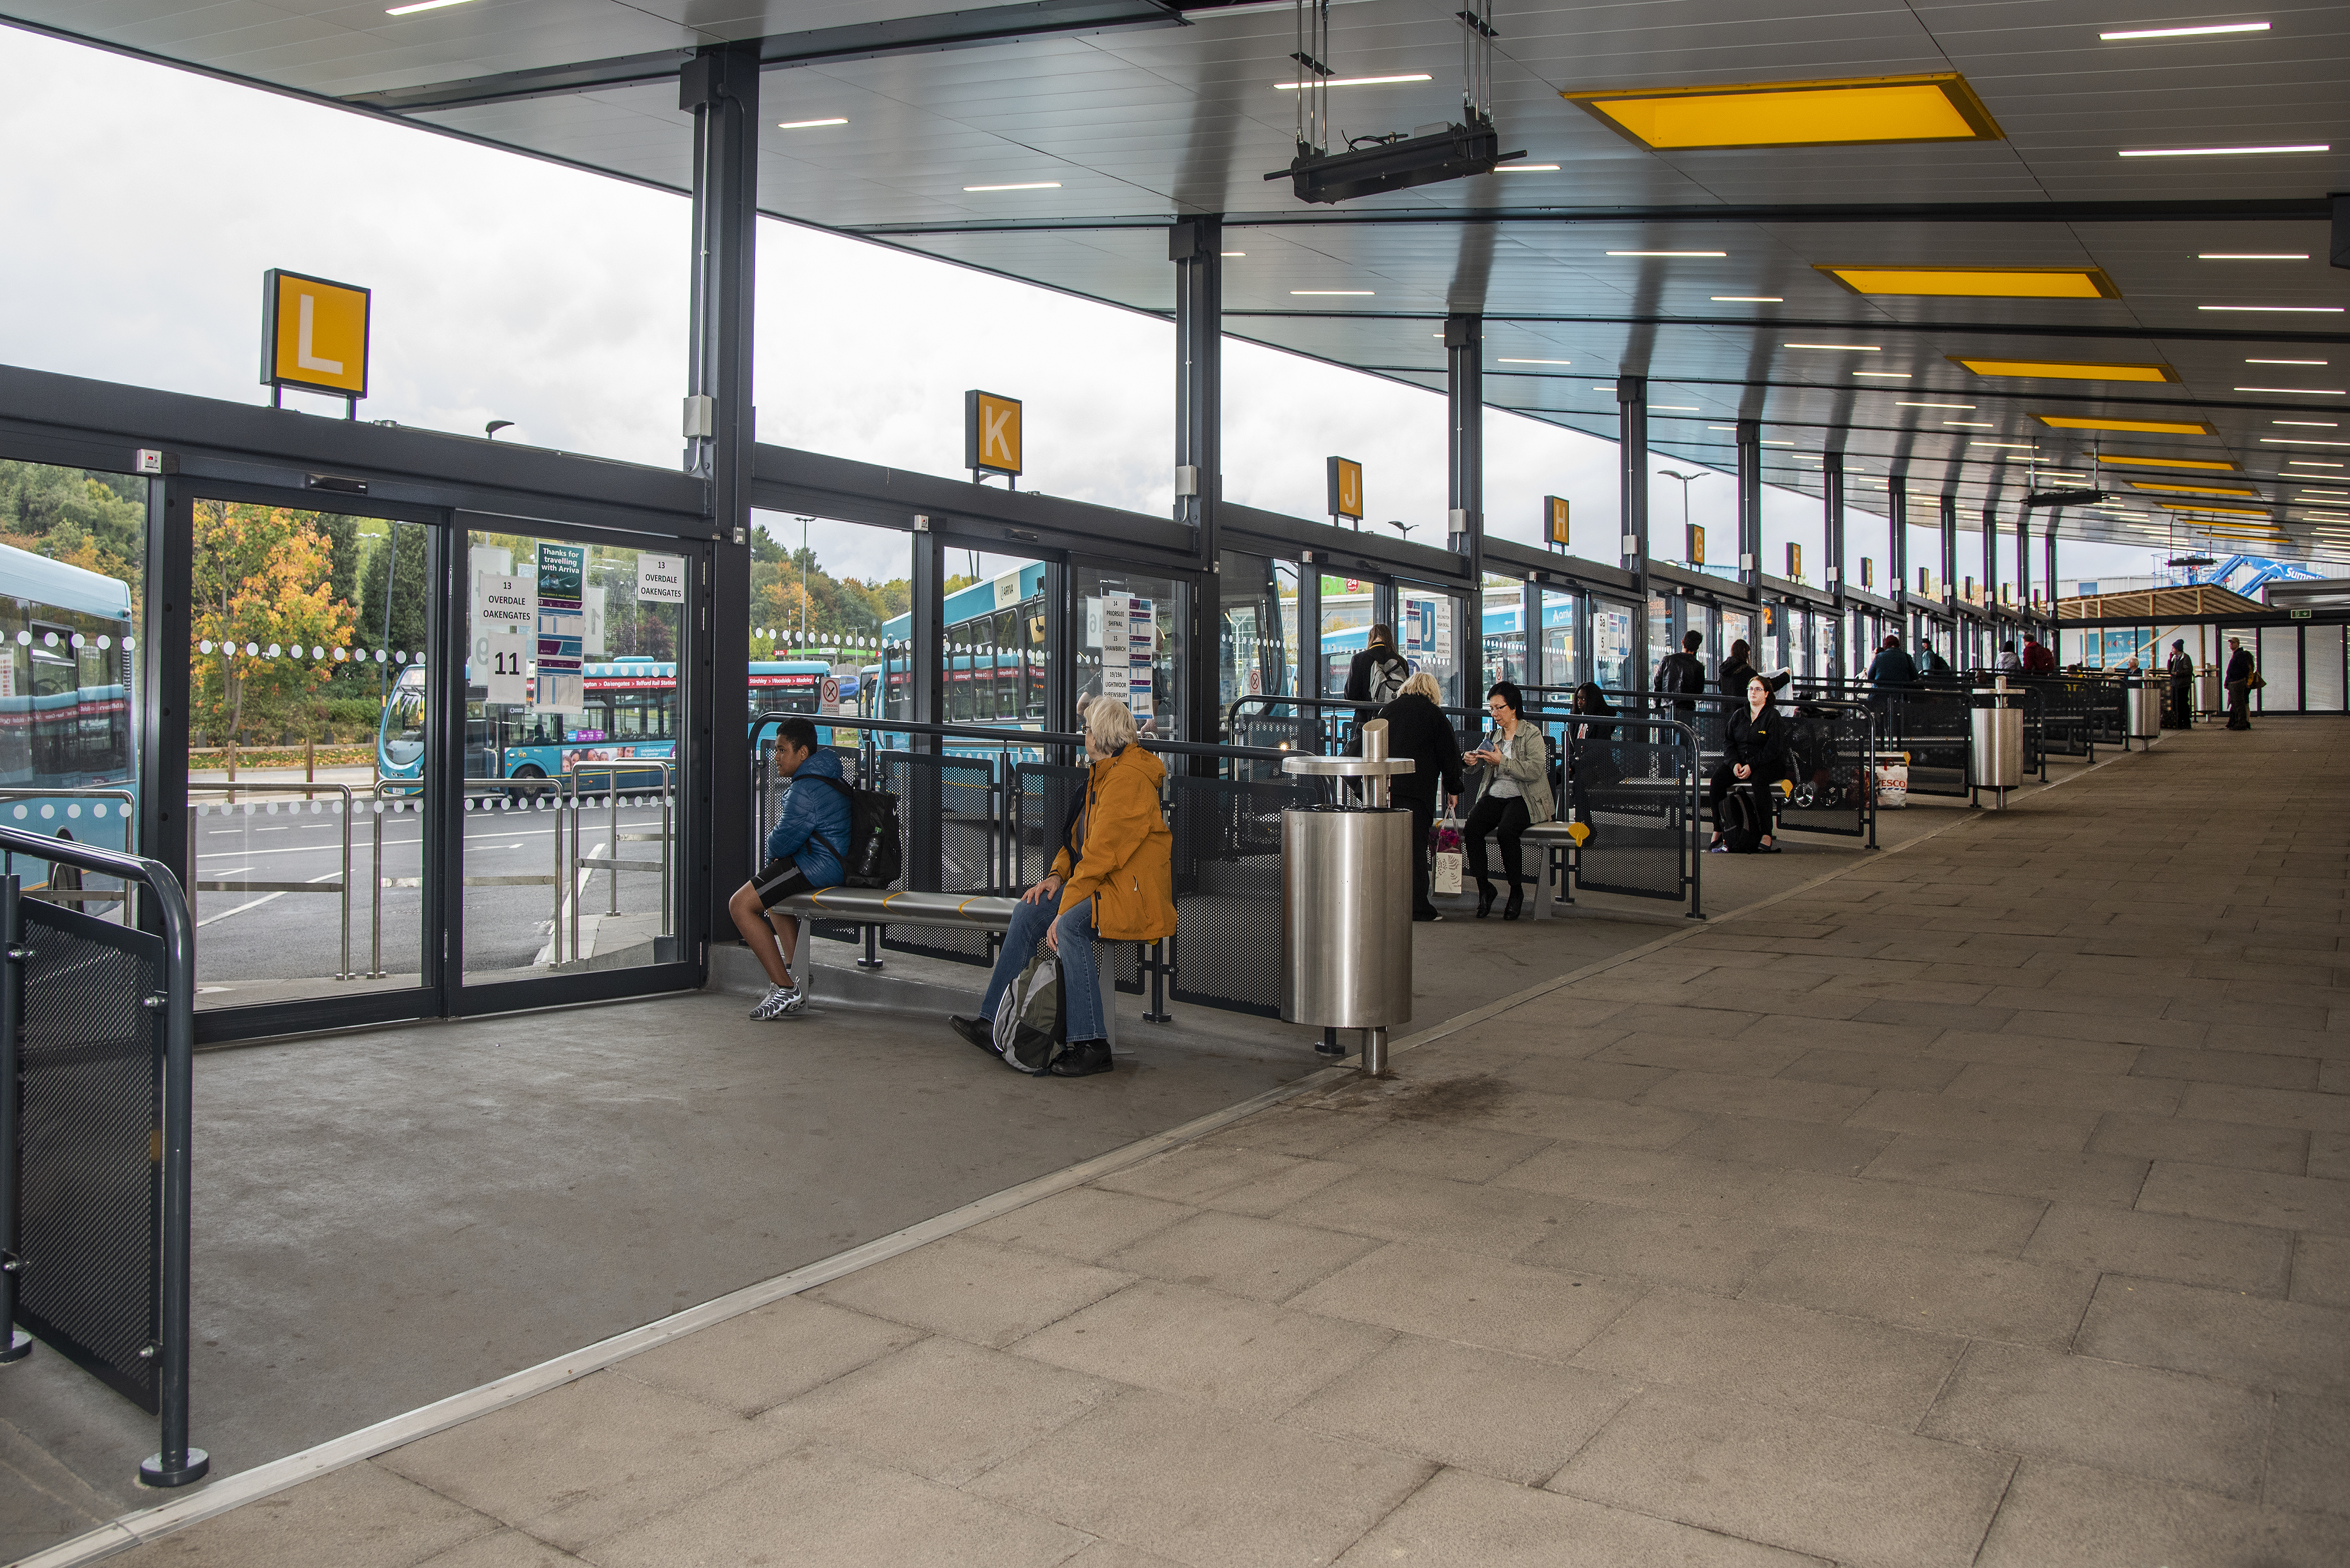 GEZE solution is just the ticket for Telford Bus Station